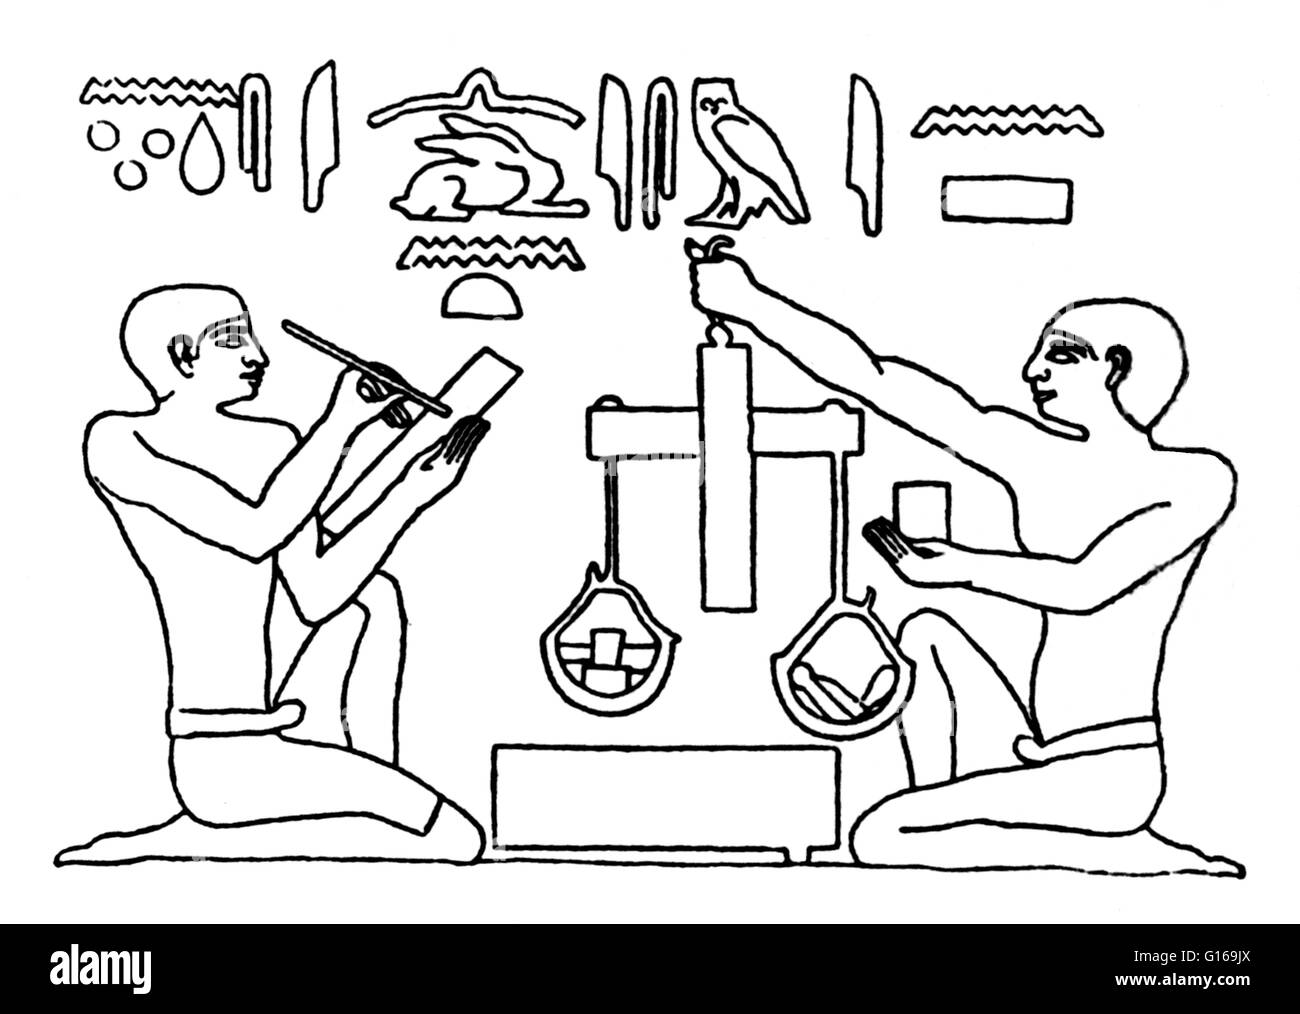 Weights and measures were among the earliest tools invented by man. Early Babylonian and Egyptian records, and the Bible, indicate that length was first measured with the forearm, hand, or finger and that time was measured by the periods of the sun, moon, Stock Photo